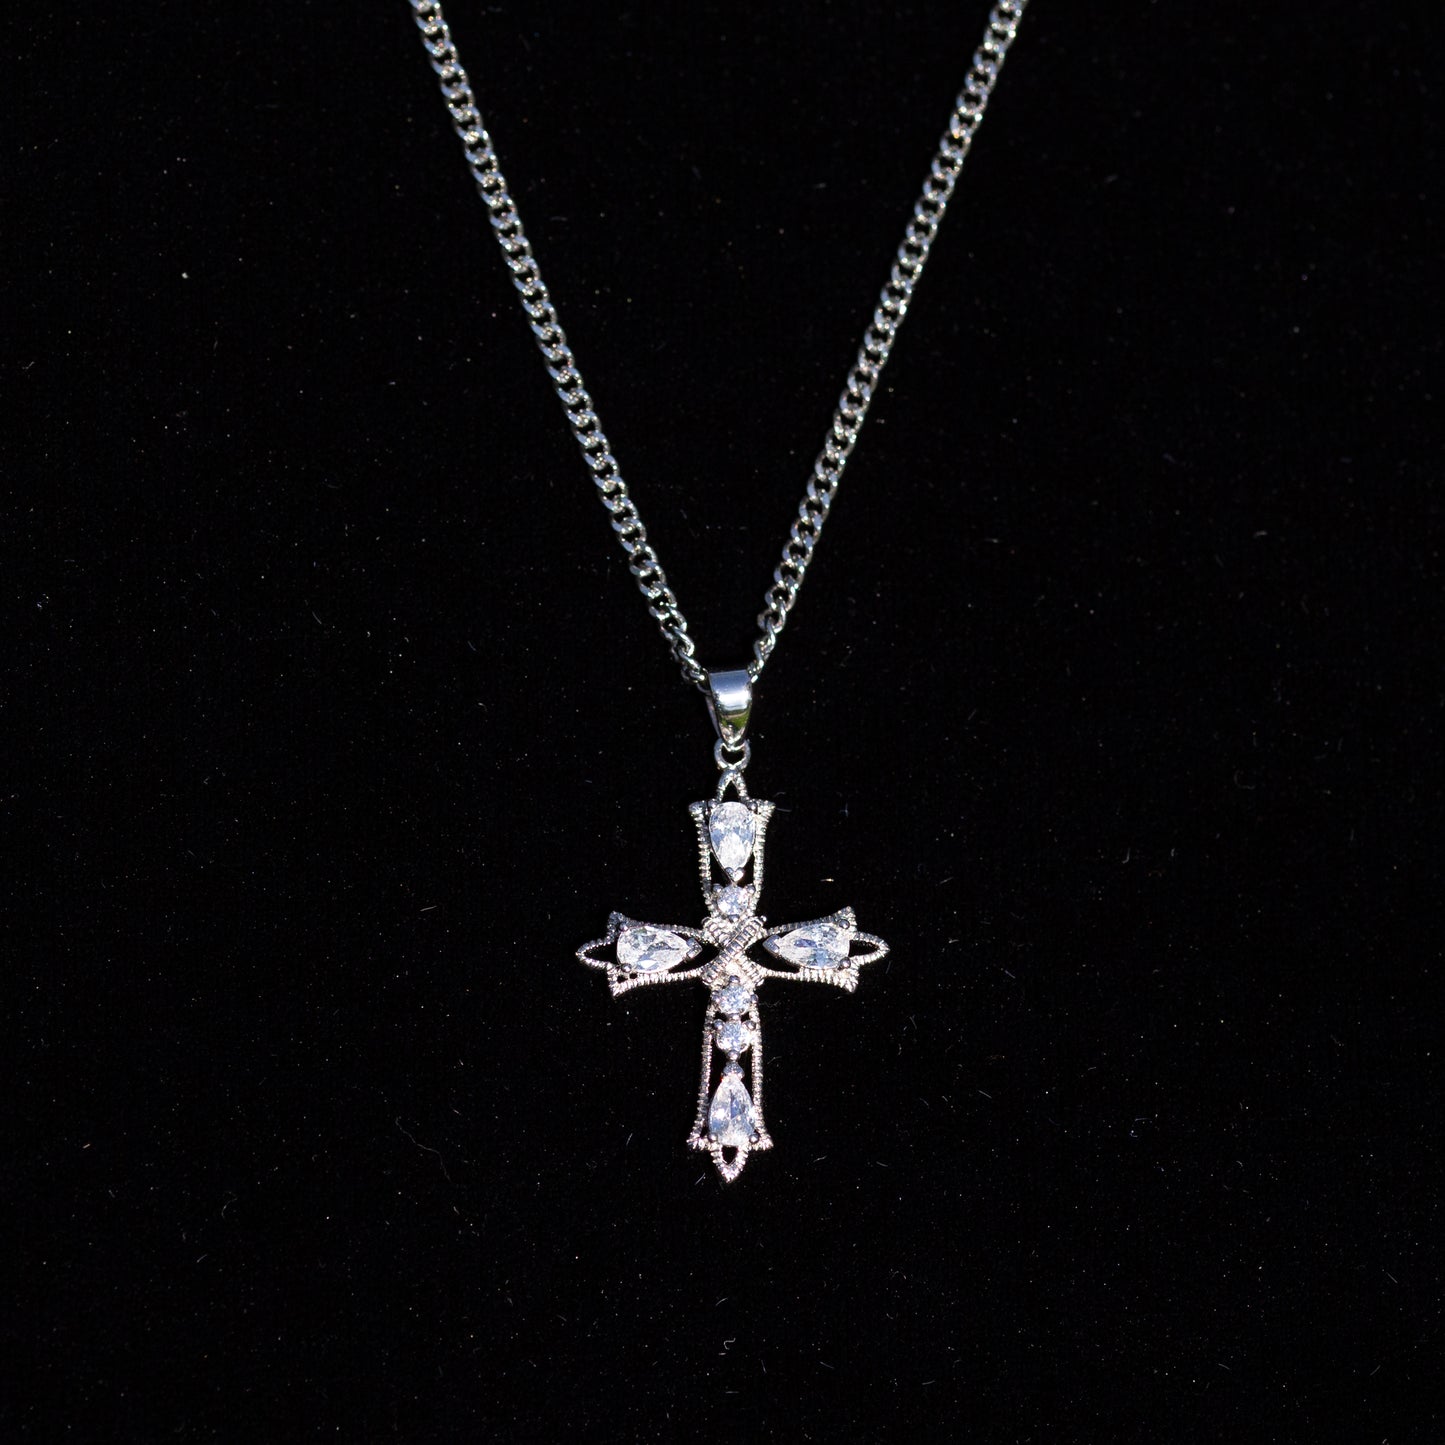 Intricate Clear Crystal Cross